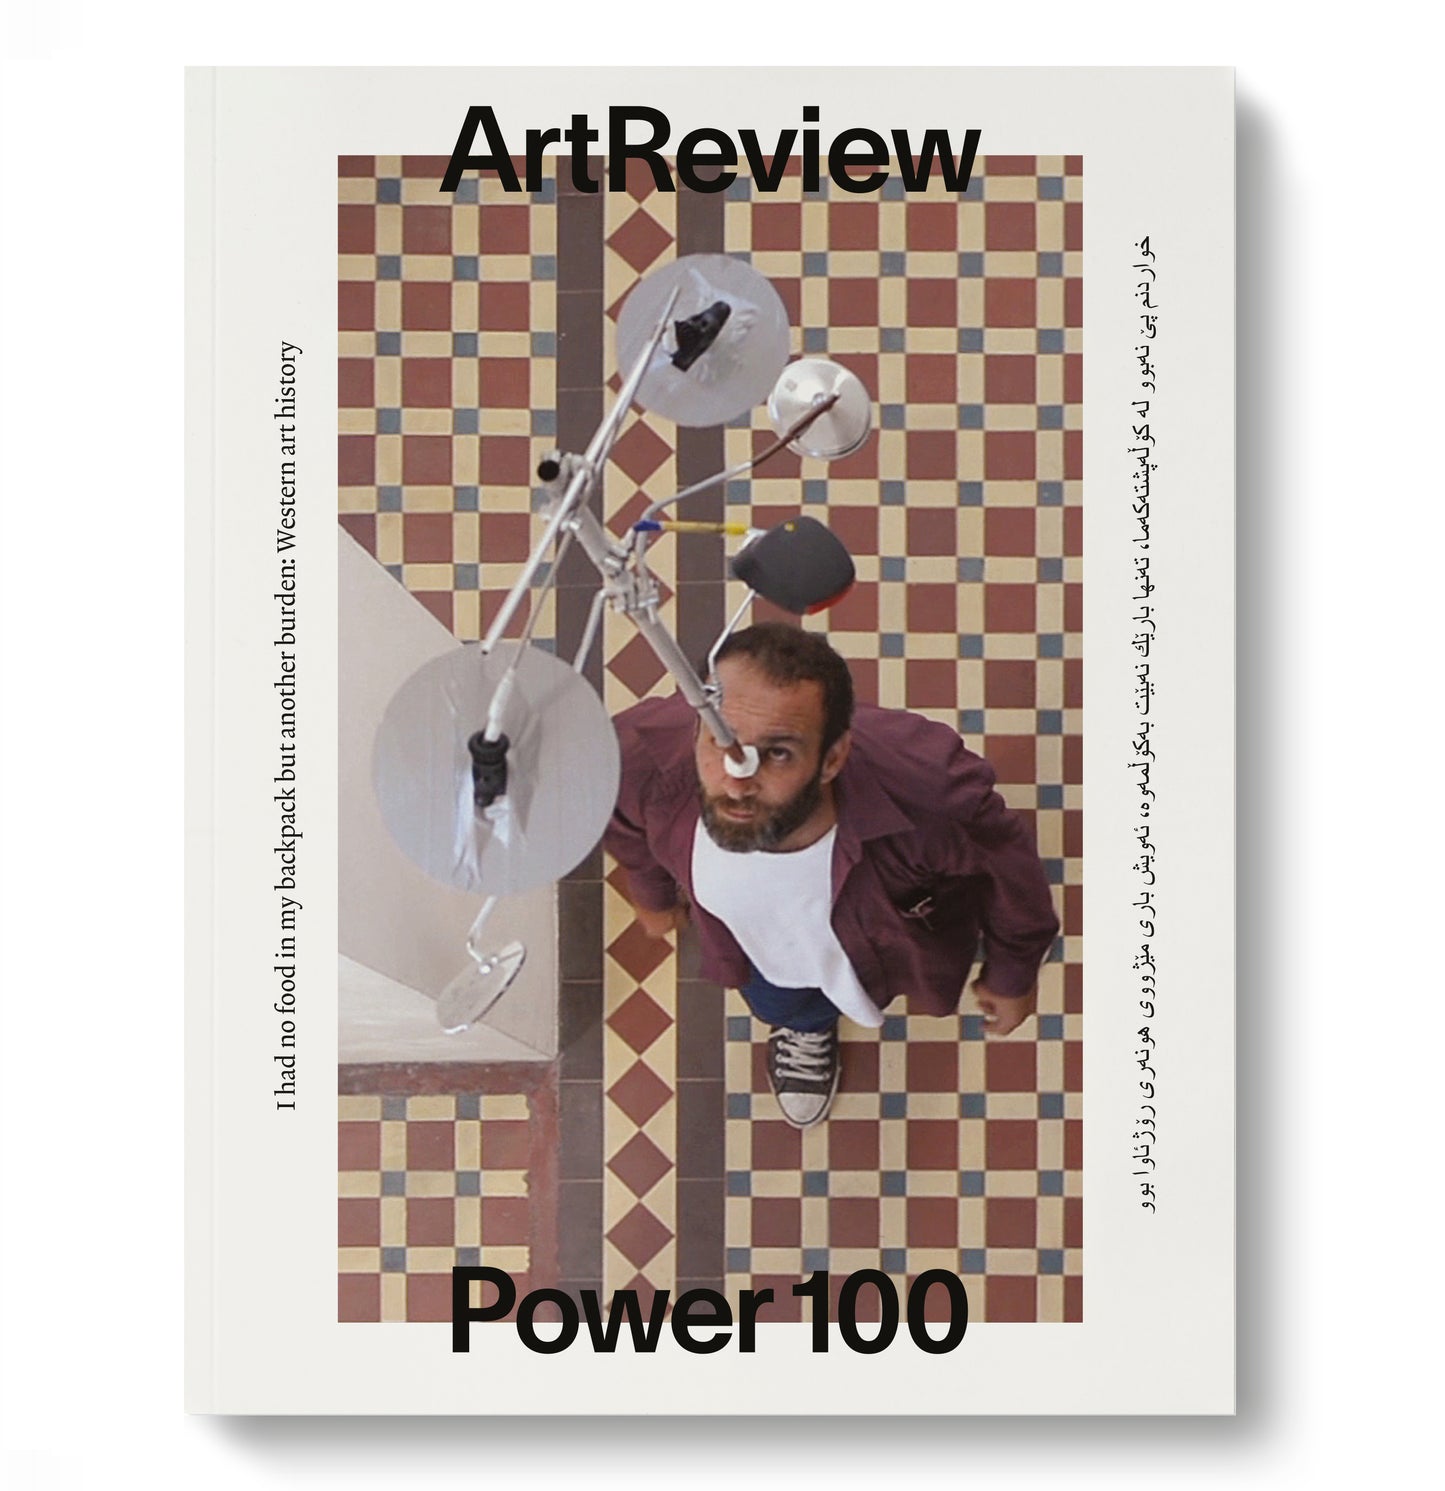 ArtReview November 2017 - Power 100